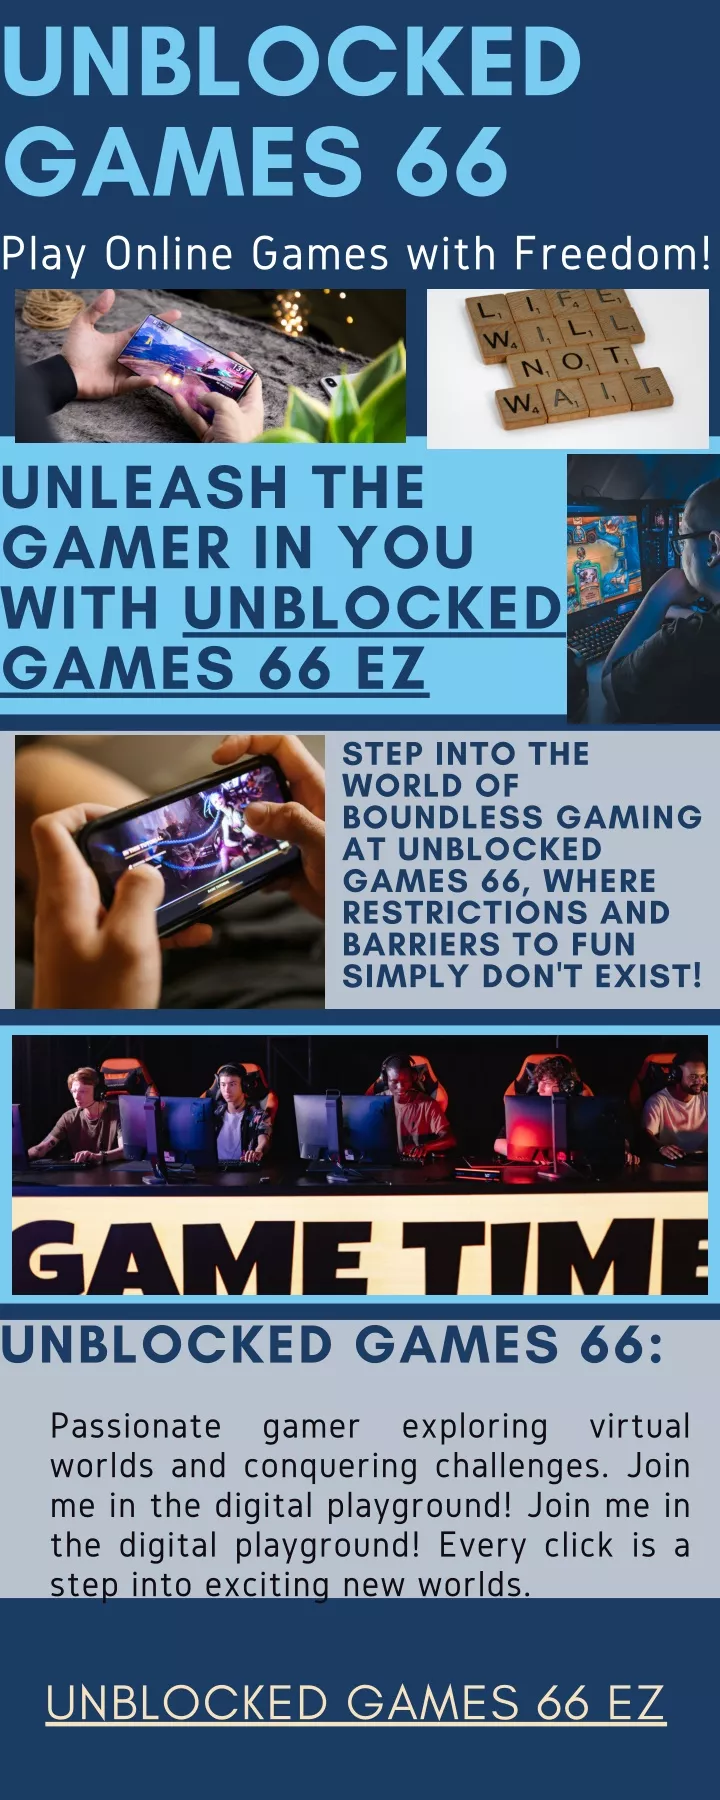 unblocked games 66 play online games with freedom